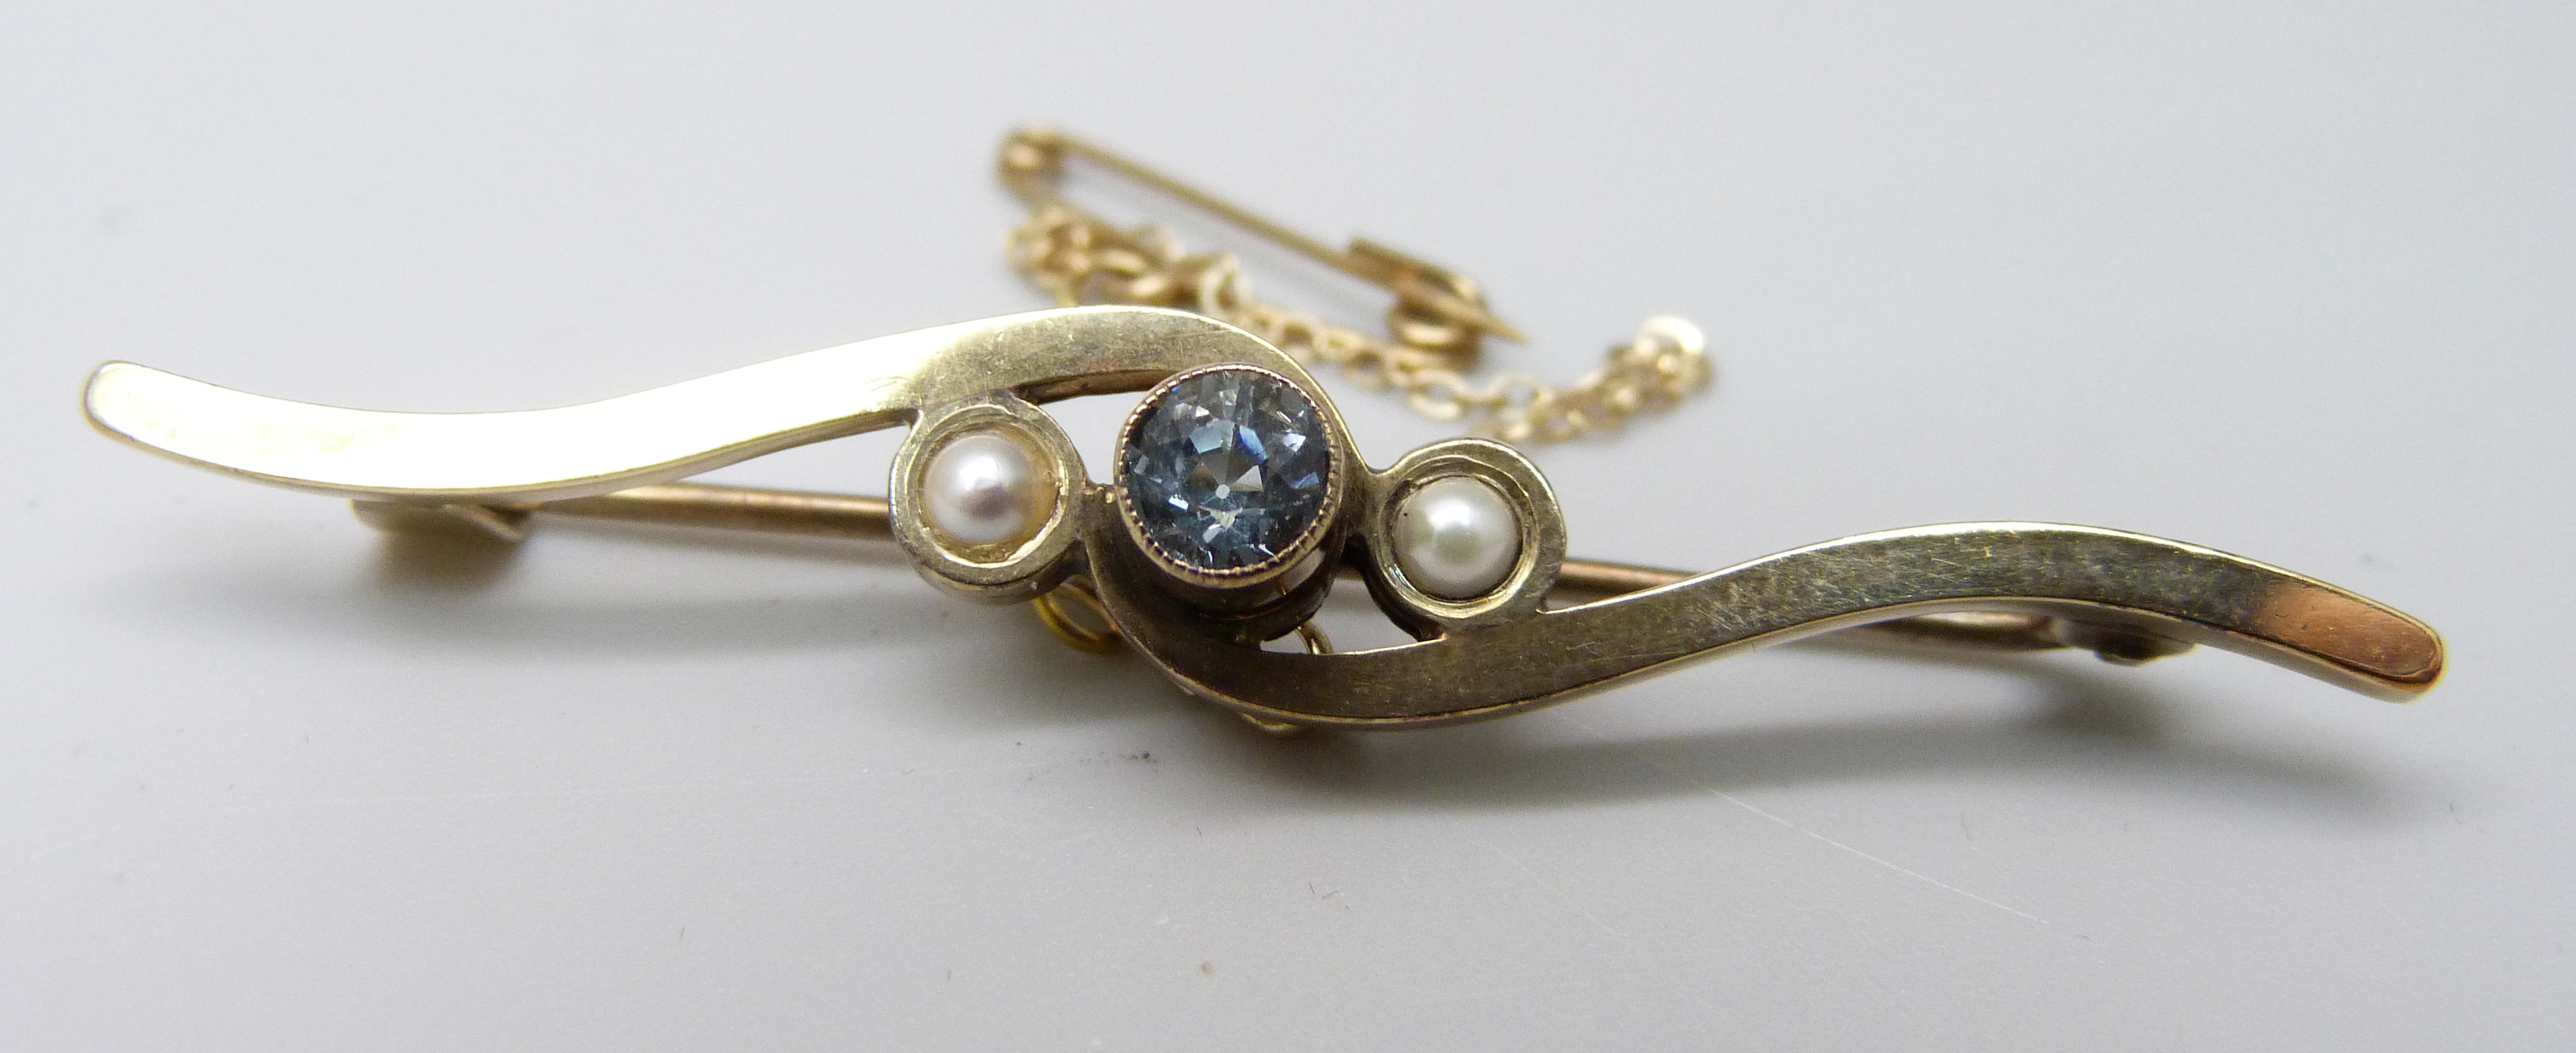 A 9ct gold, aquamarine and pearl brooch, 3.7g - Image 2 of 4